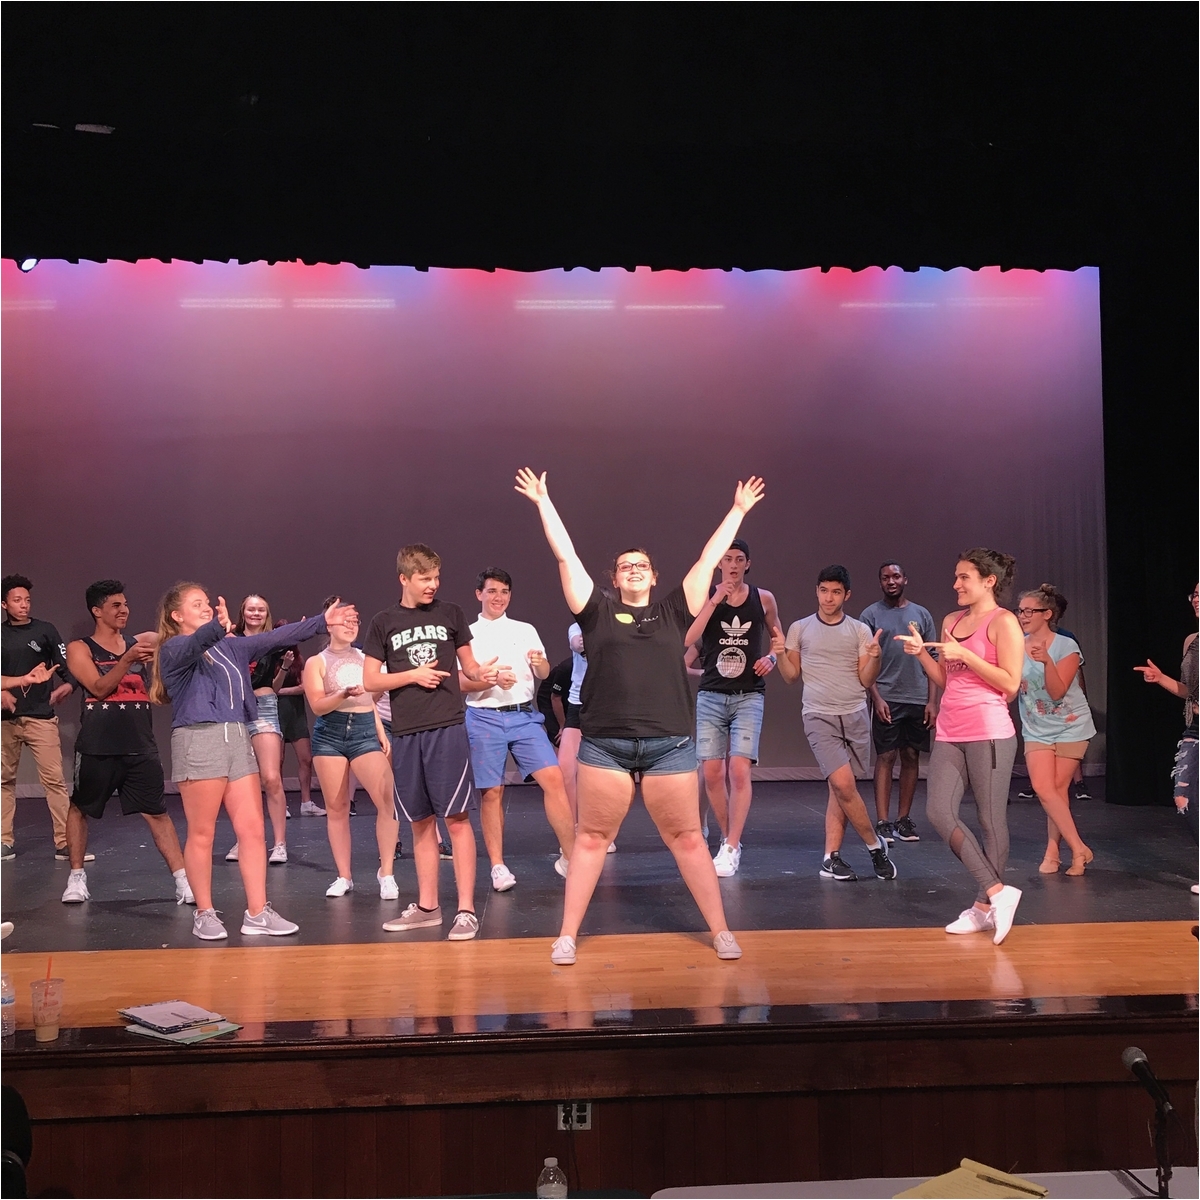 spotlight arts mainstage program provides local students with a professional theatre performance education through a large scale commercial production